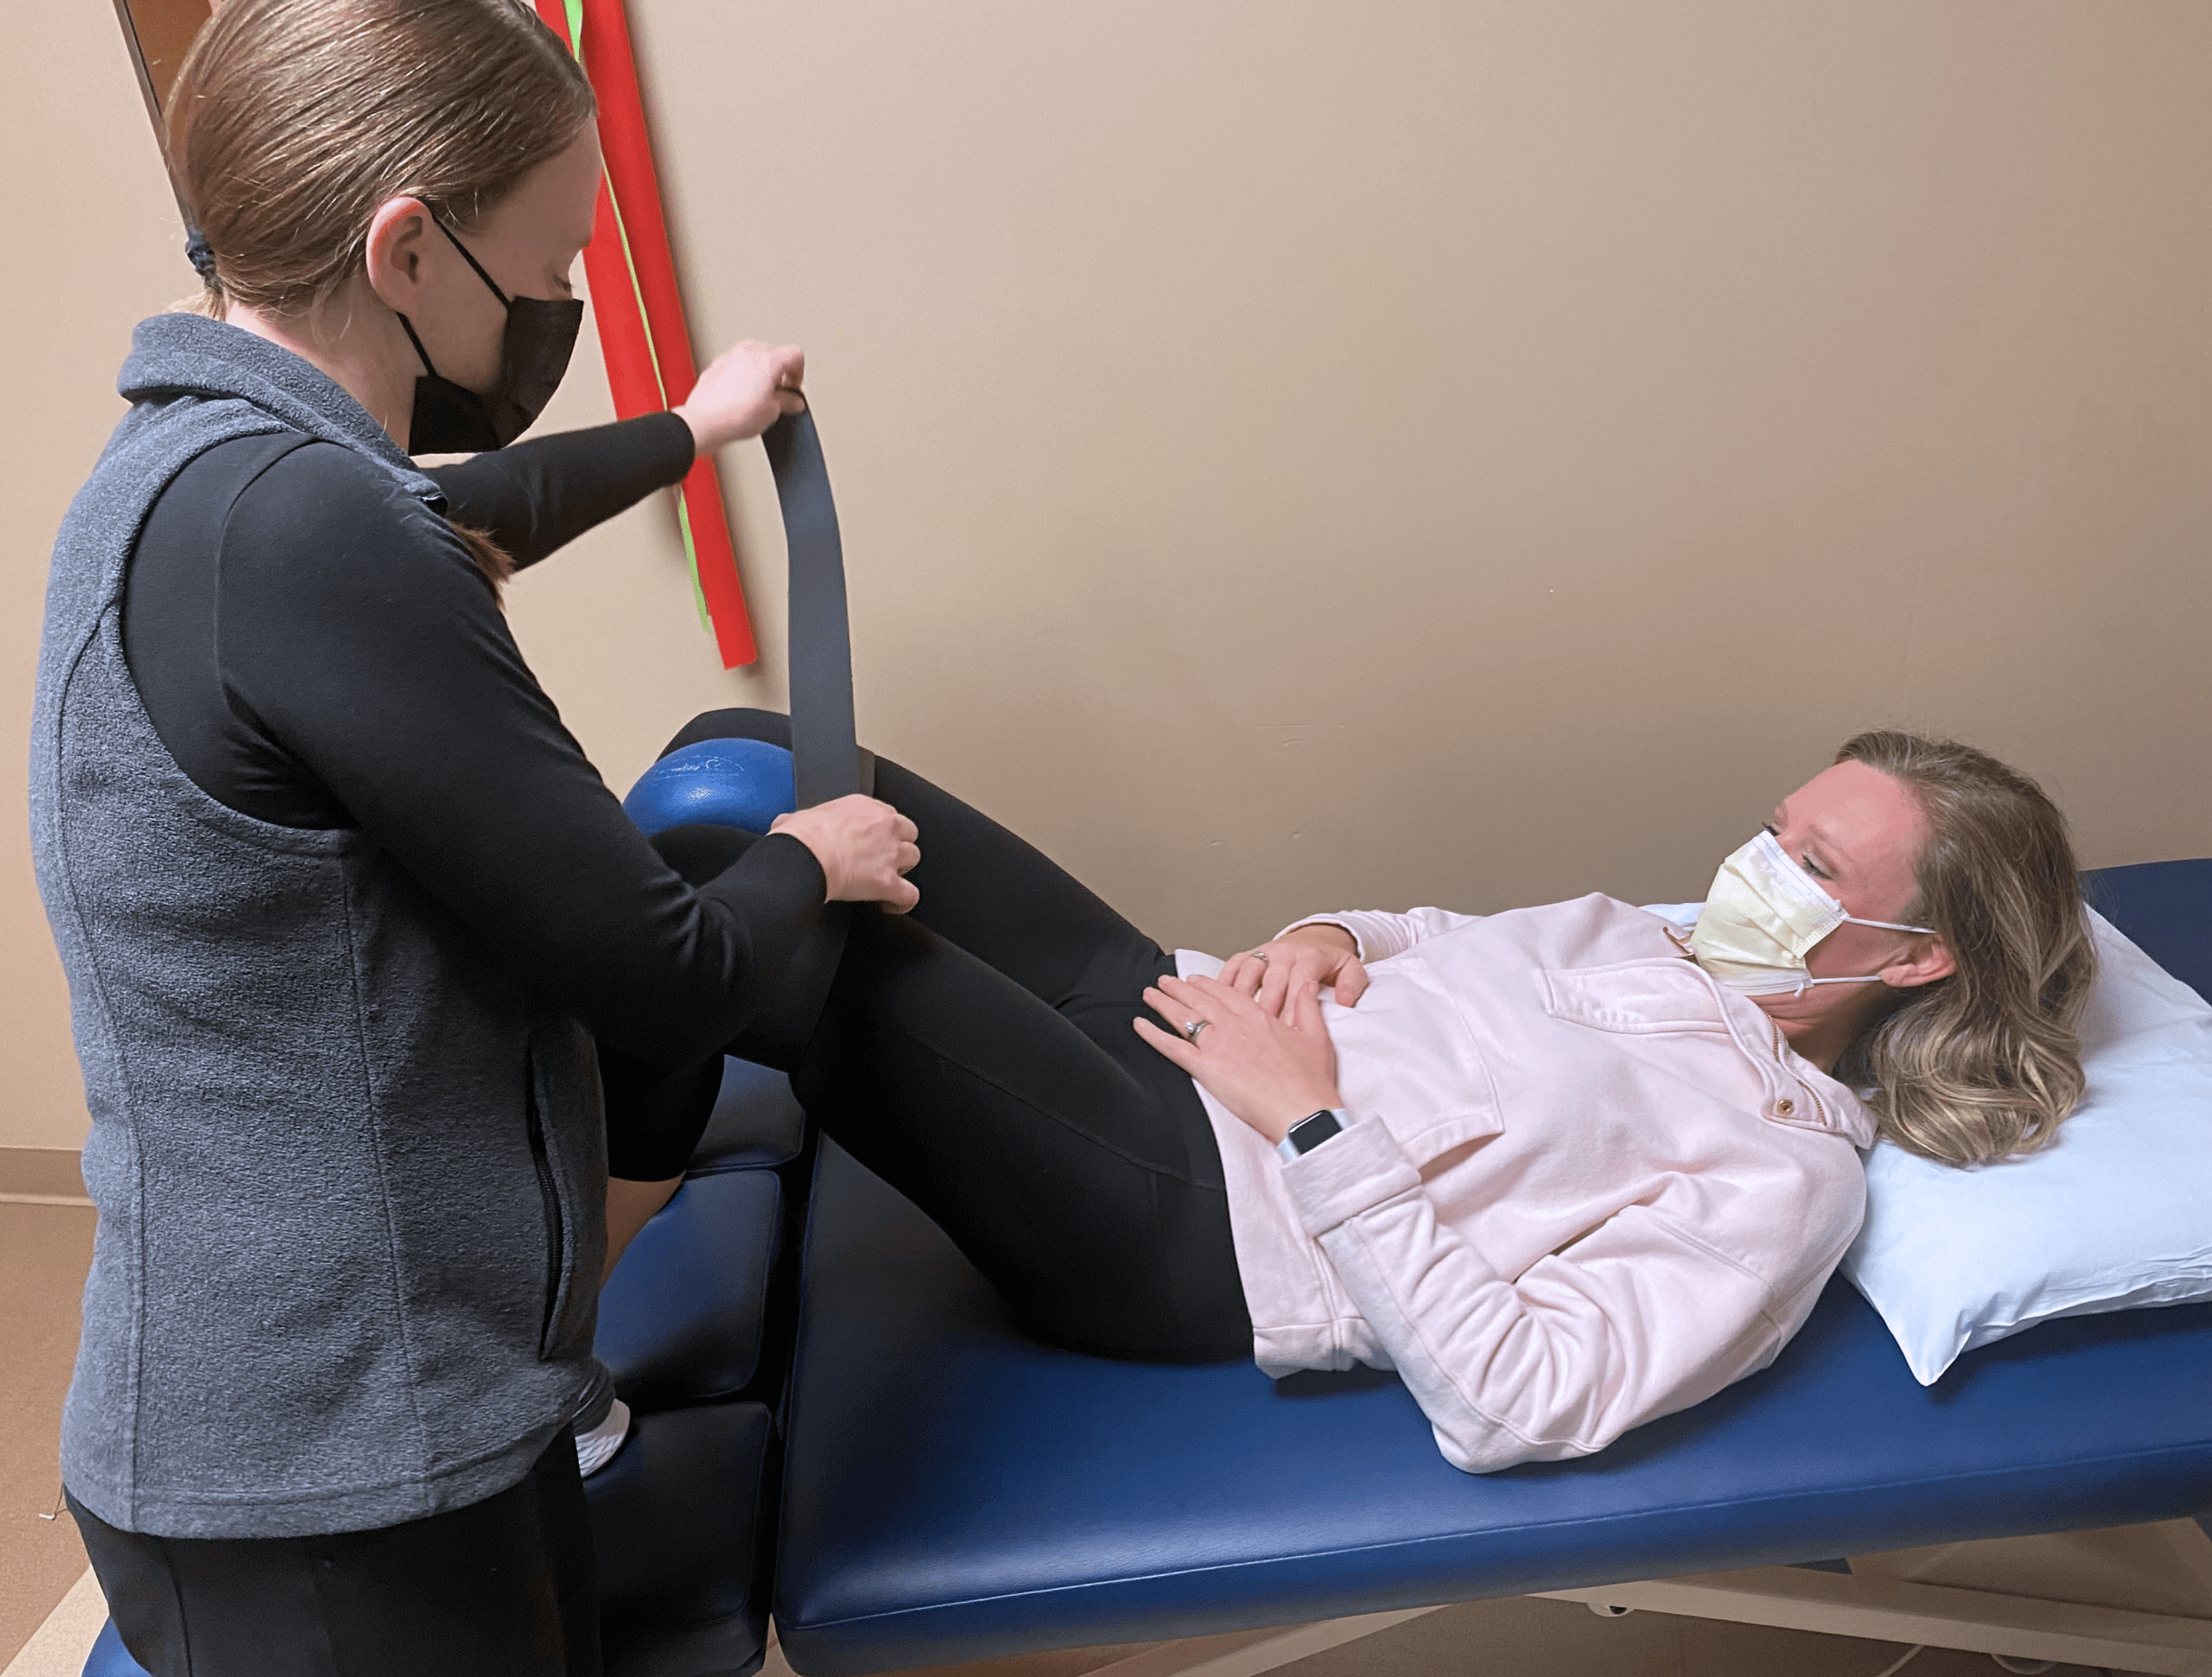 Pelvic Floor Physical Therapy Specialty Offered at Memorial – Memorial  Hospital